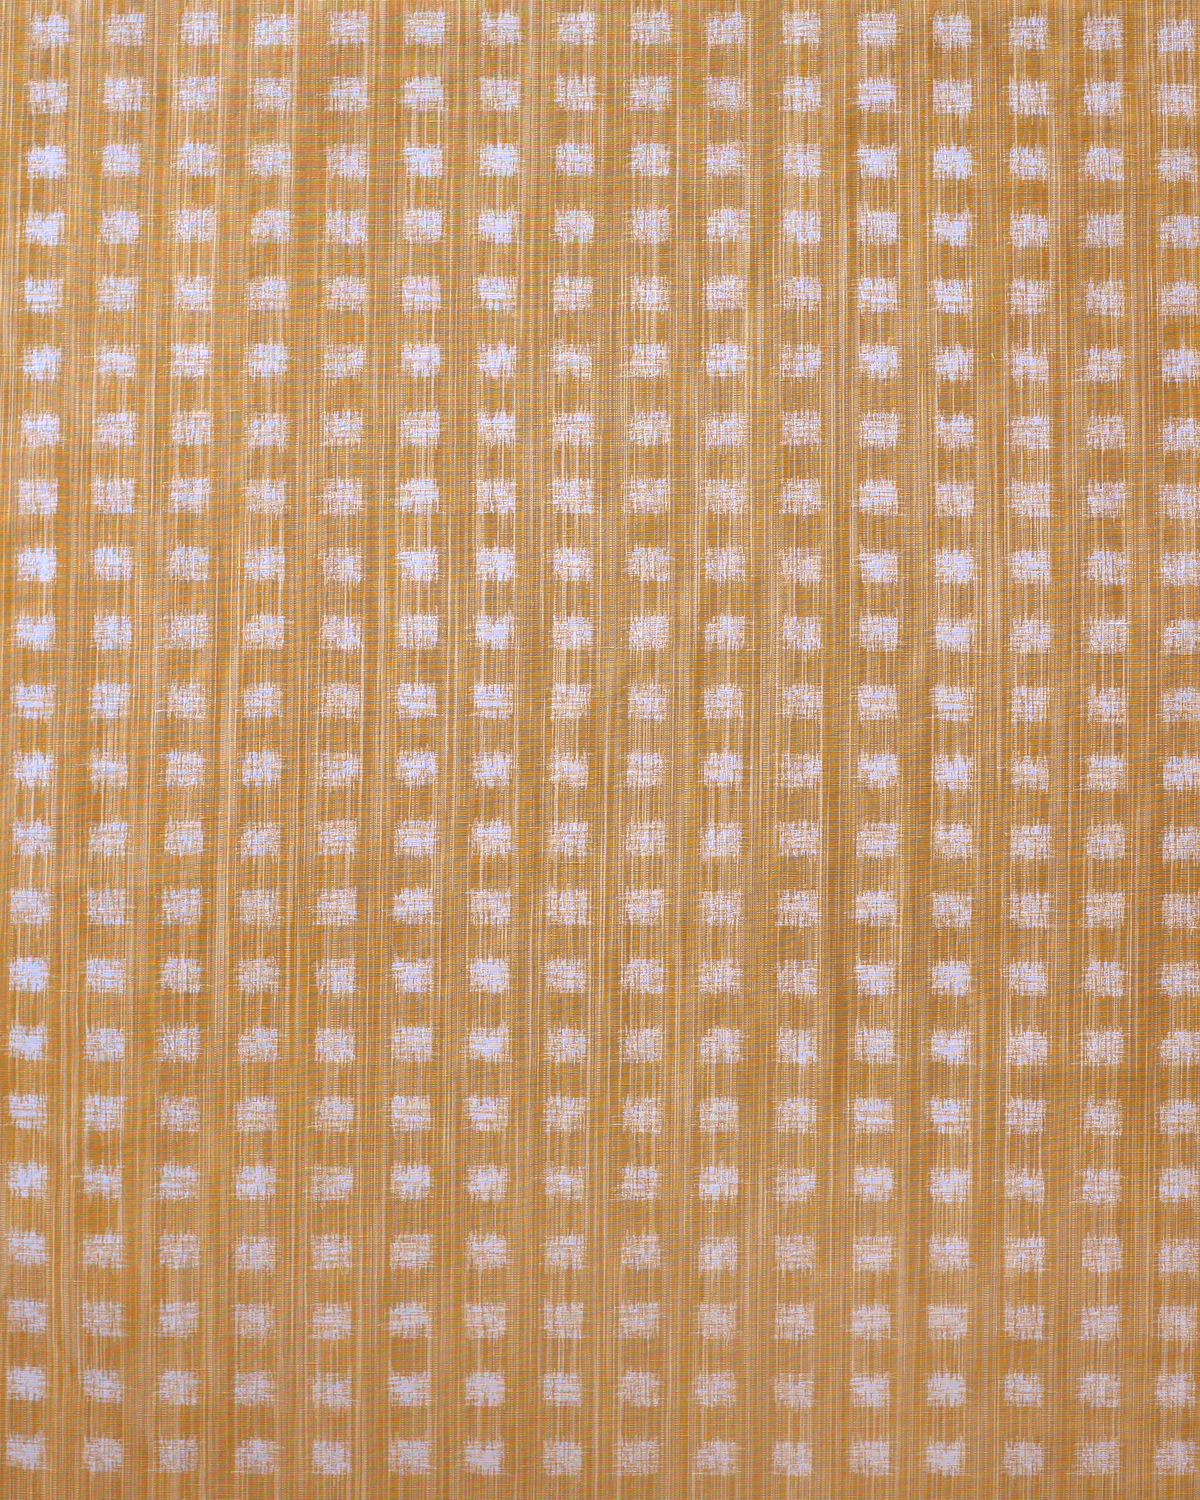 Gridded Ikat Fabric in Goldenrod